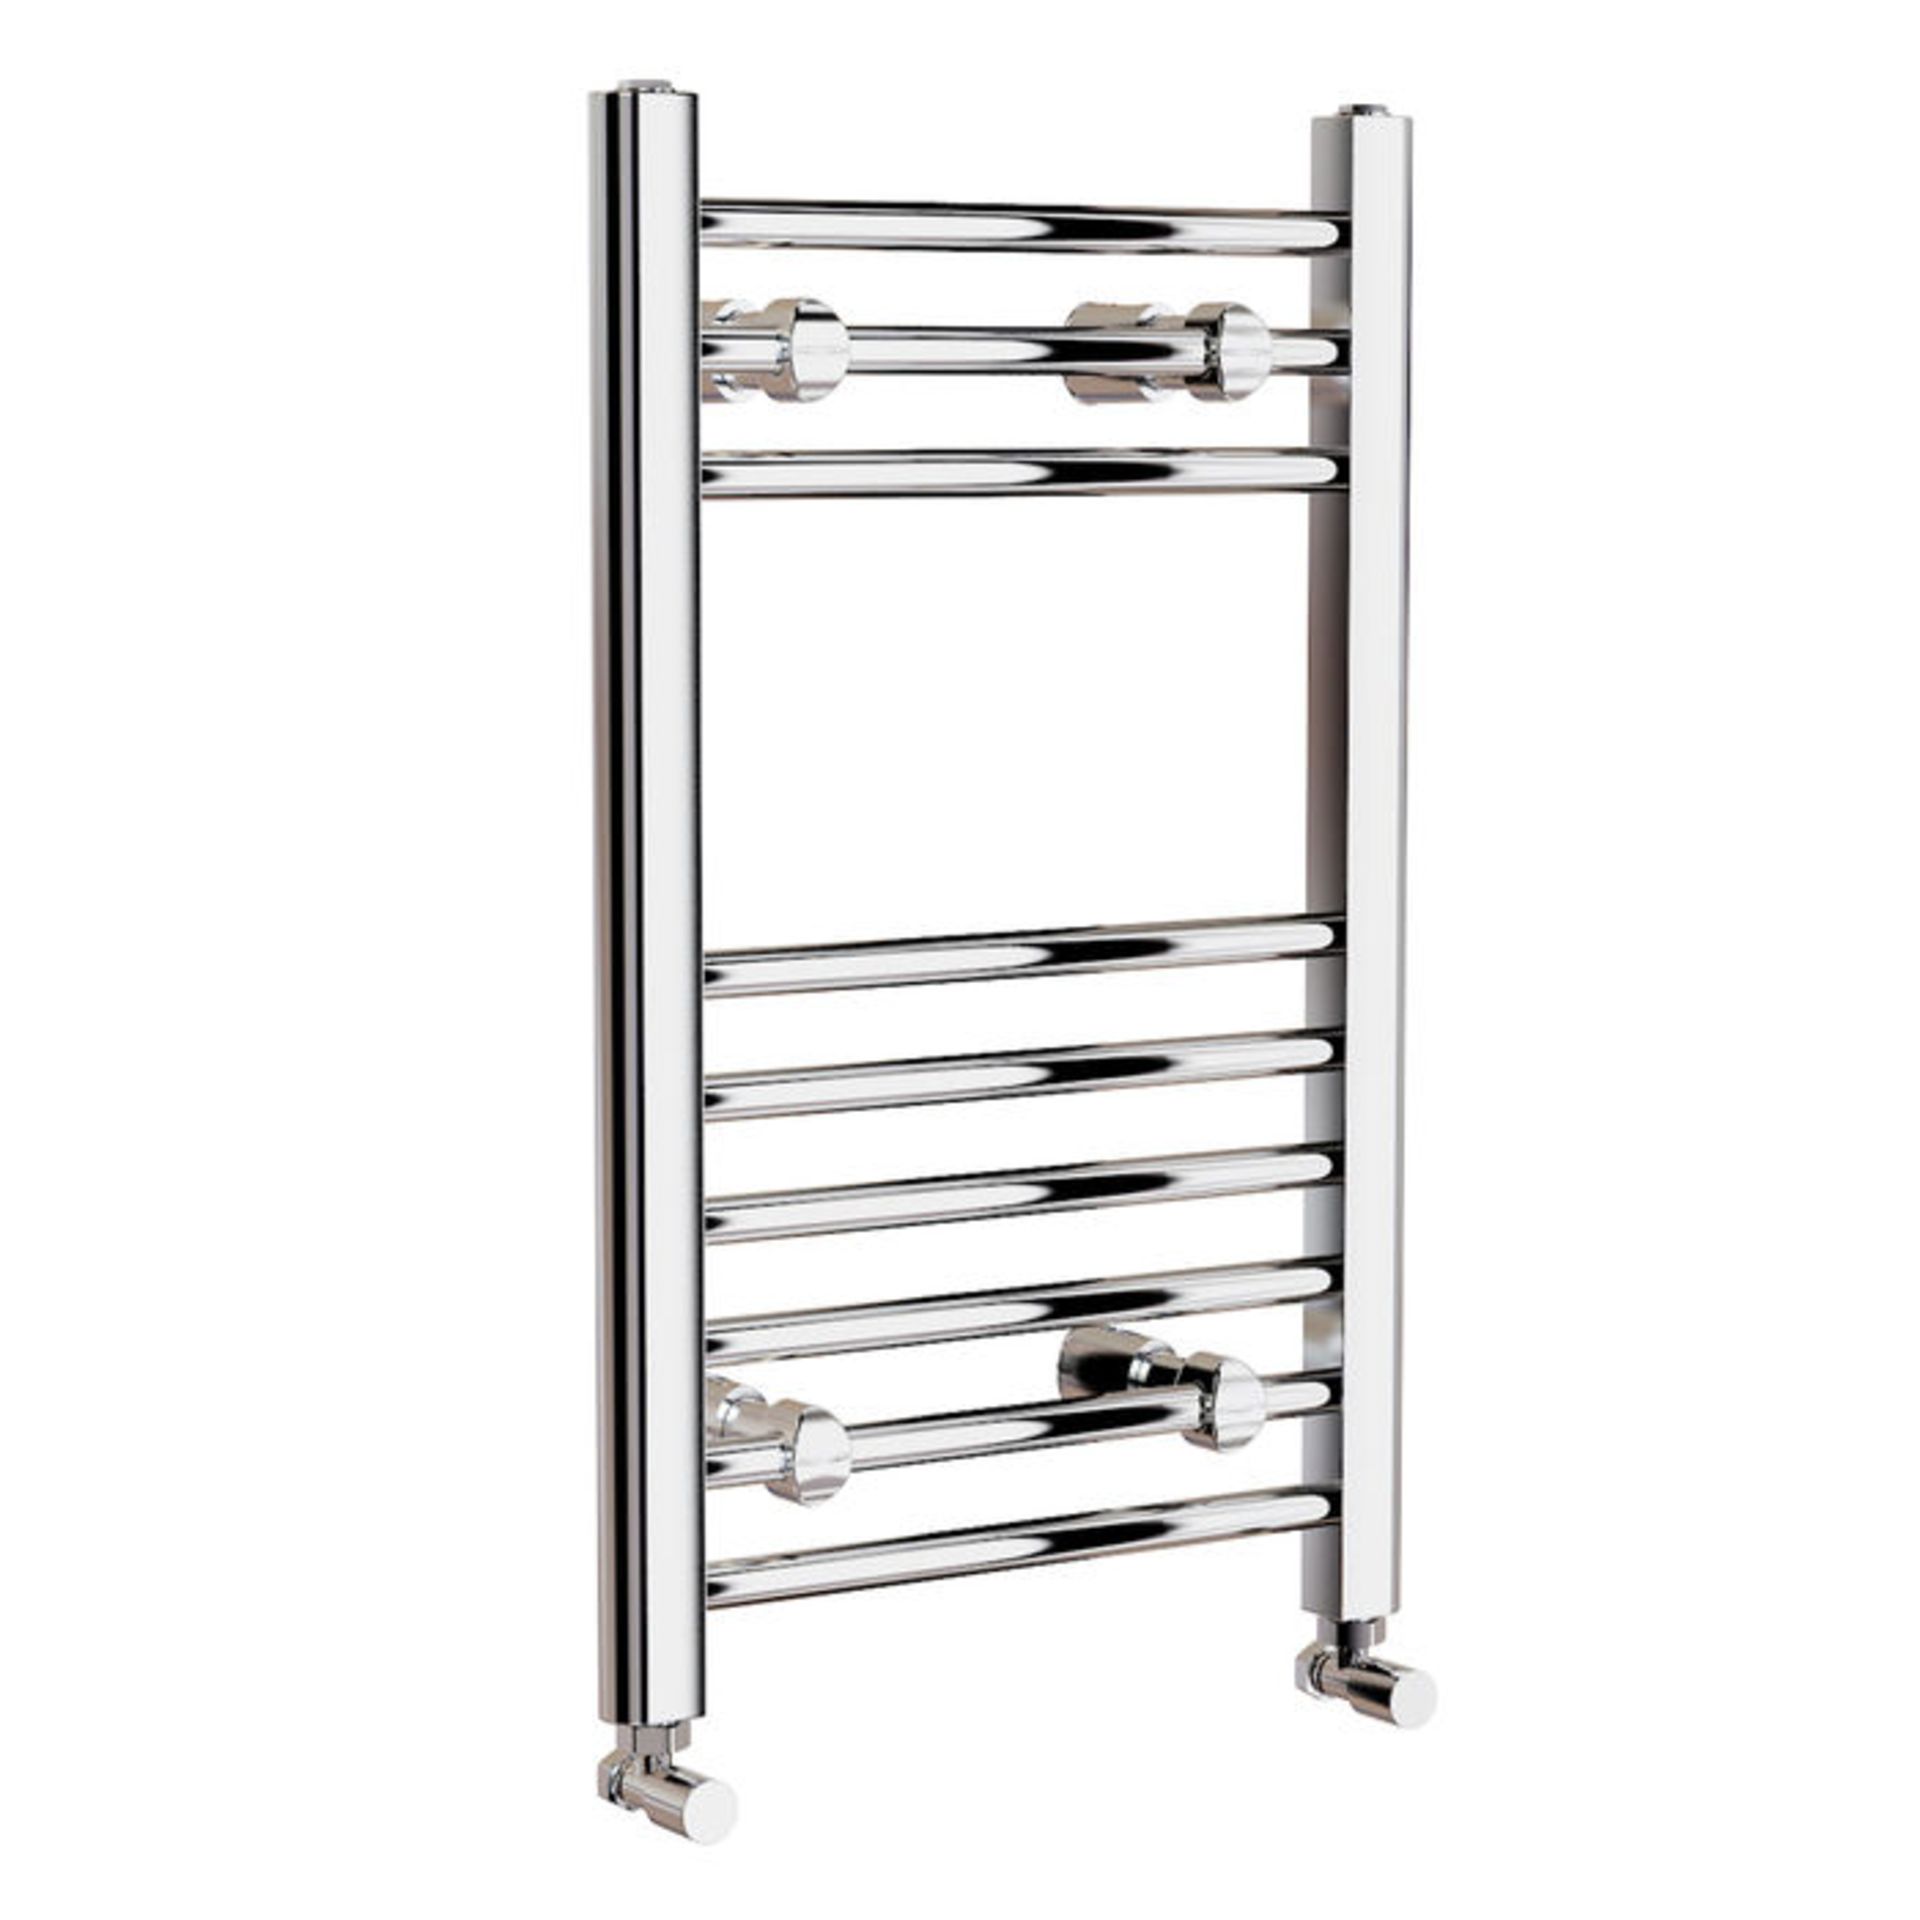 (EY11) 650x400mm Straight Heated Towel Radiator. Low carbon steel chrome plated radiator. This